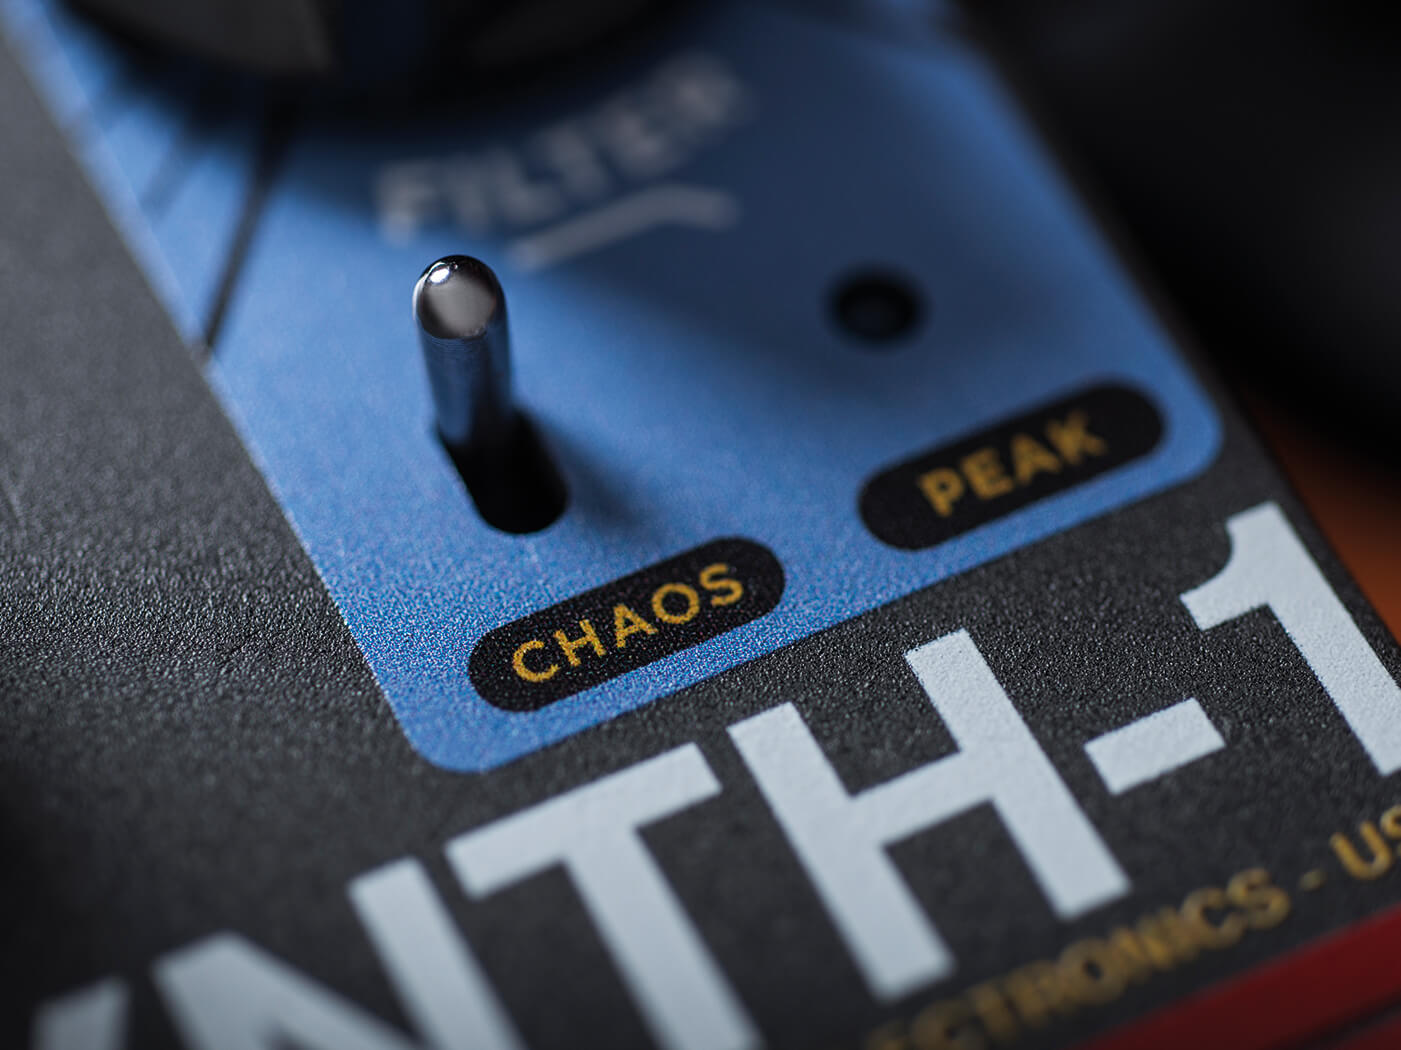 Review Keeley Synth-1 chaos toggle